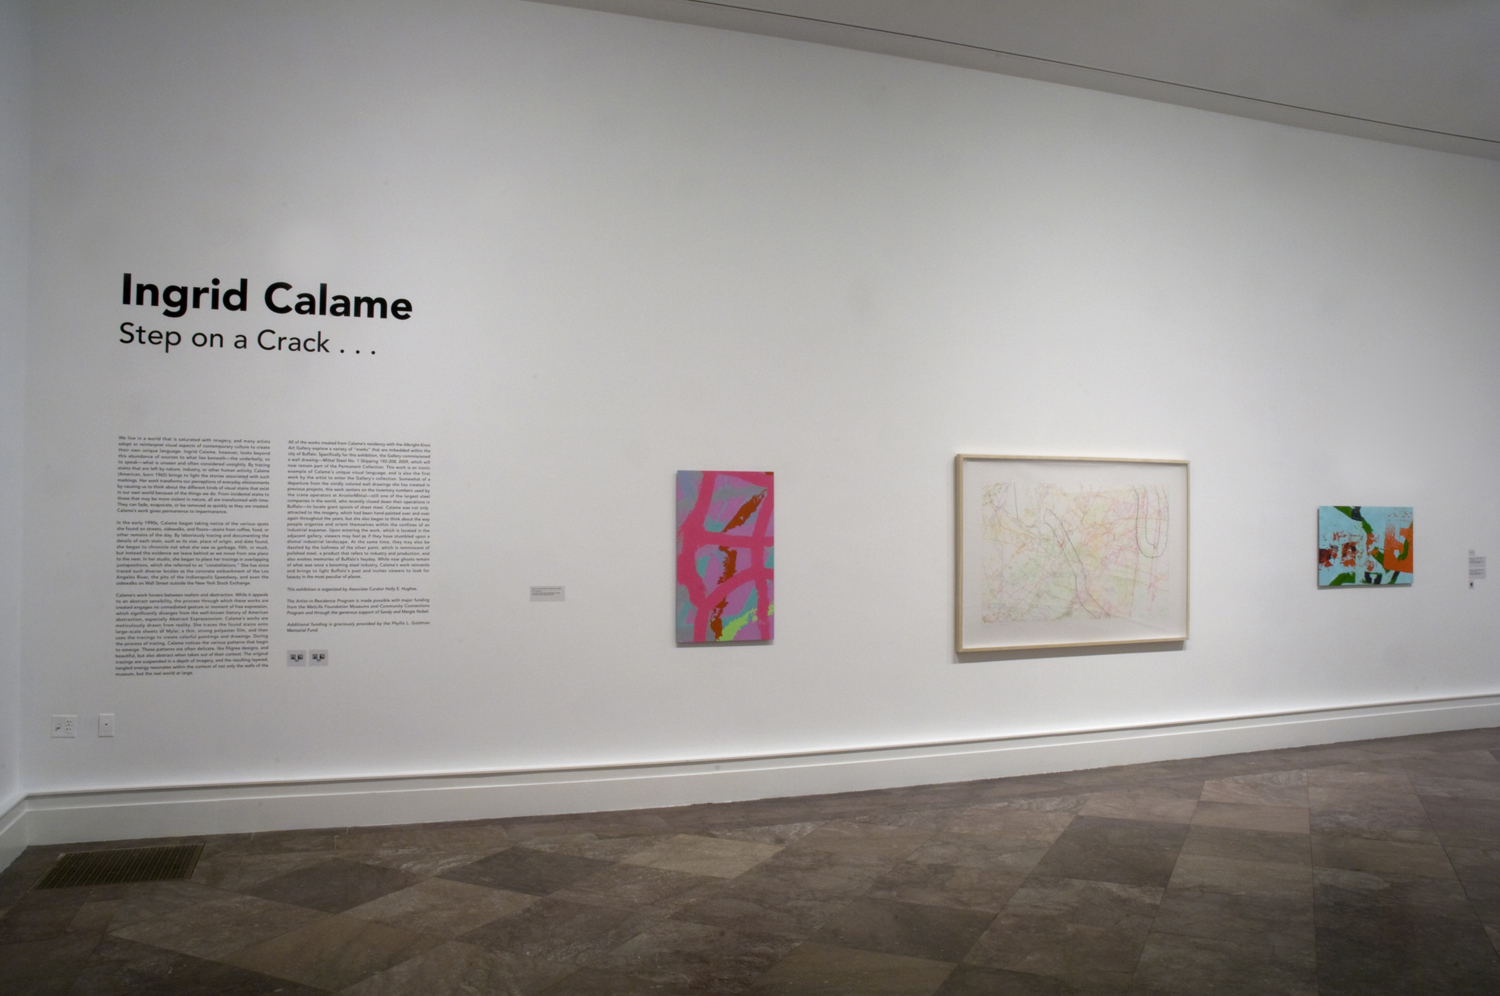 Albright Knox Art Gallery, installation view of "Ingrid Calame: Step on a Crack," 2009